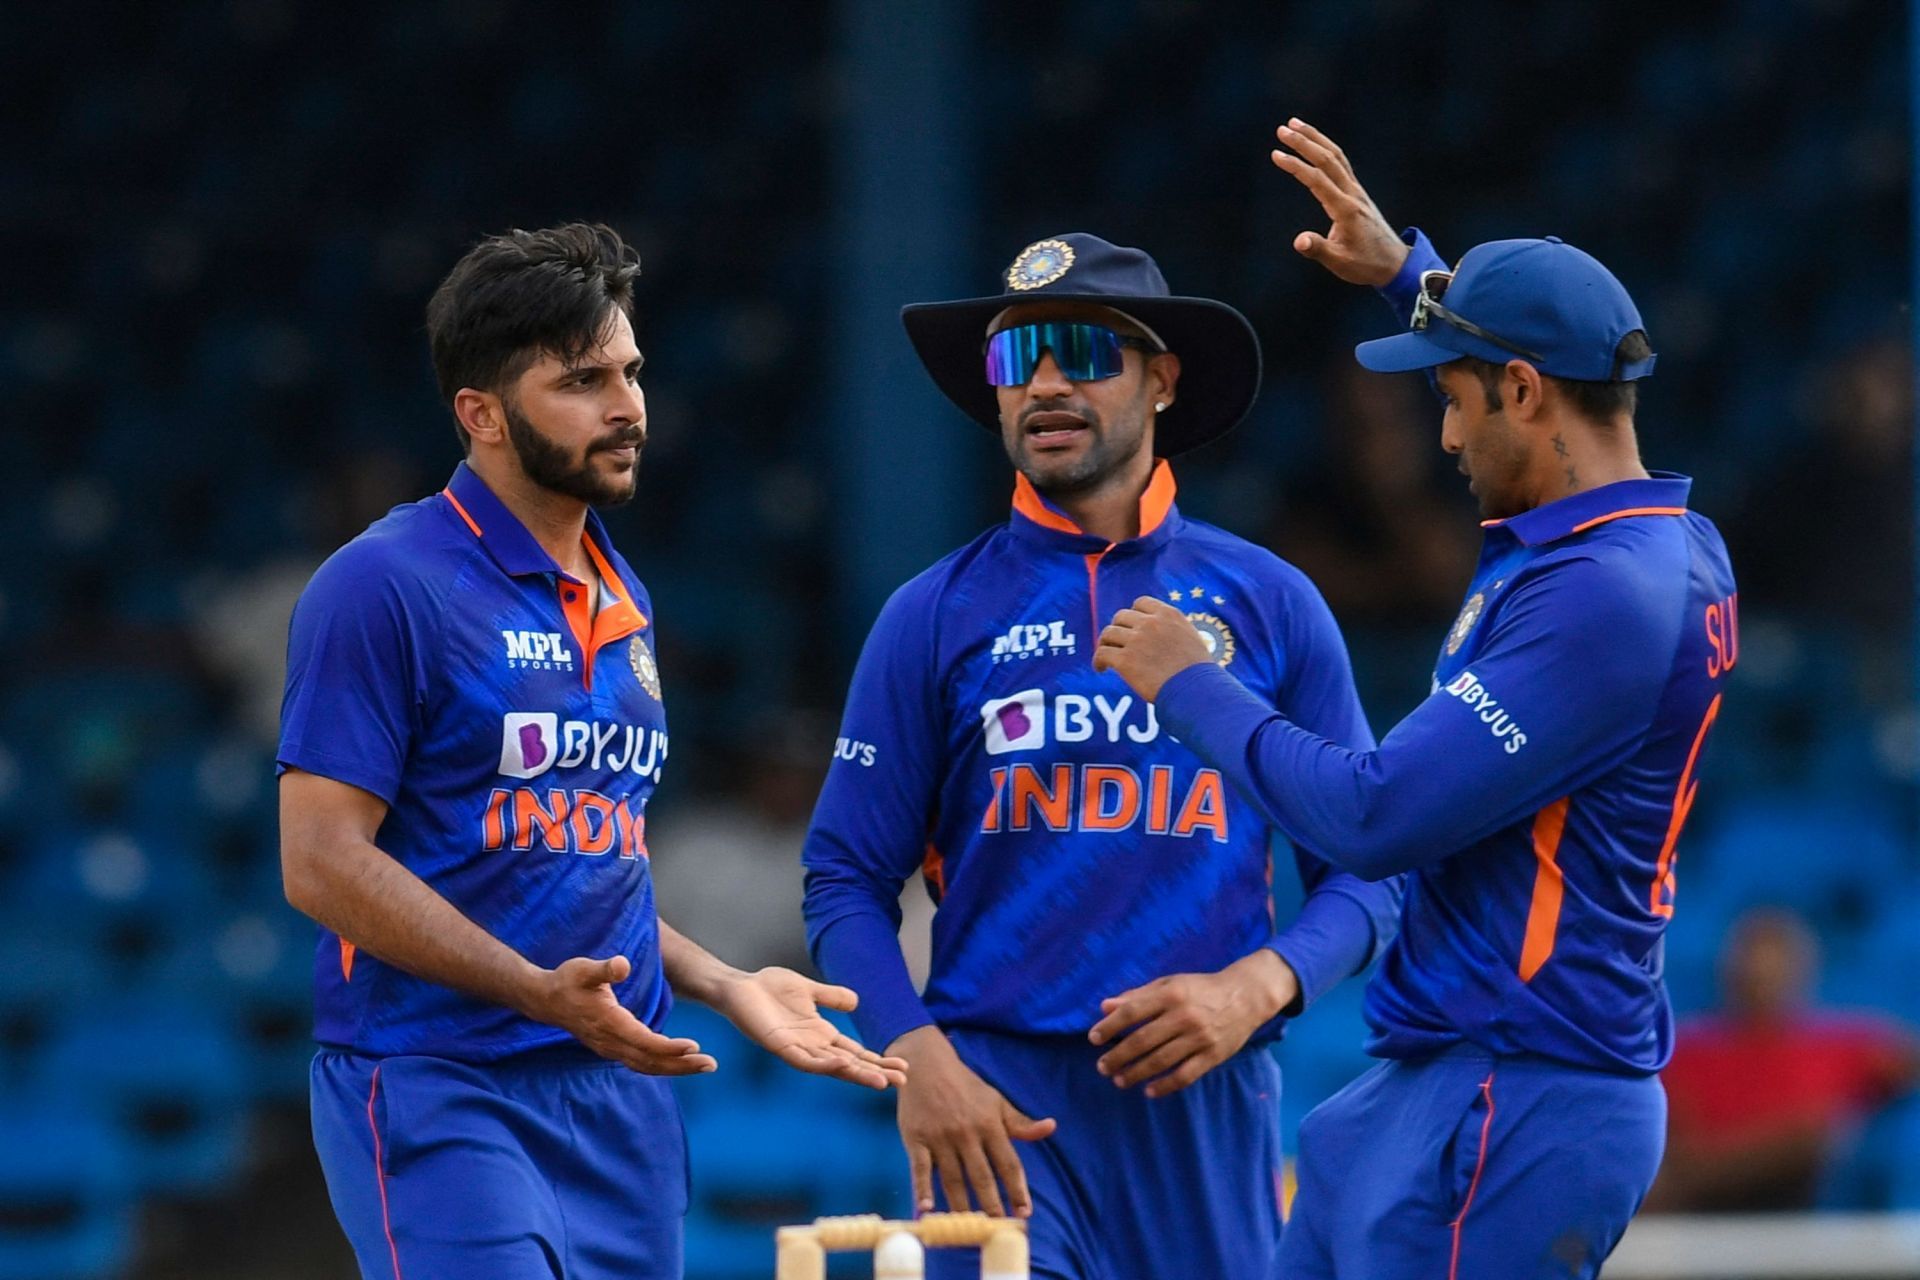 Team India registered a thrilling win in the first ODI against West Indies [P/C: BCCI/Twitter]